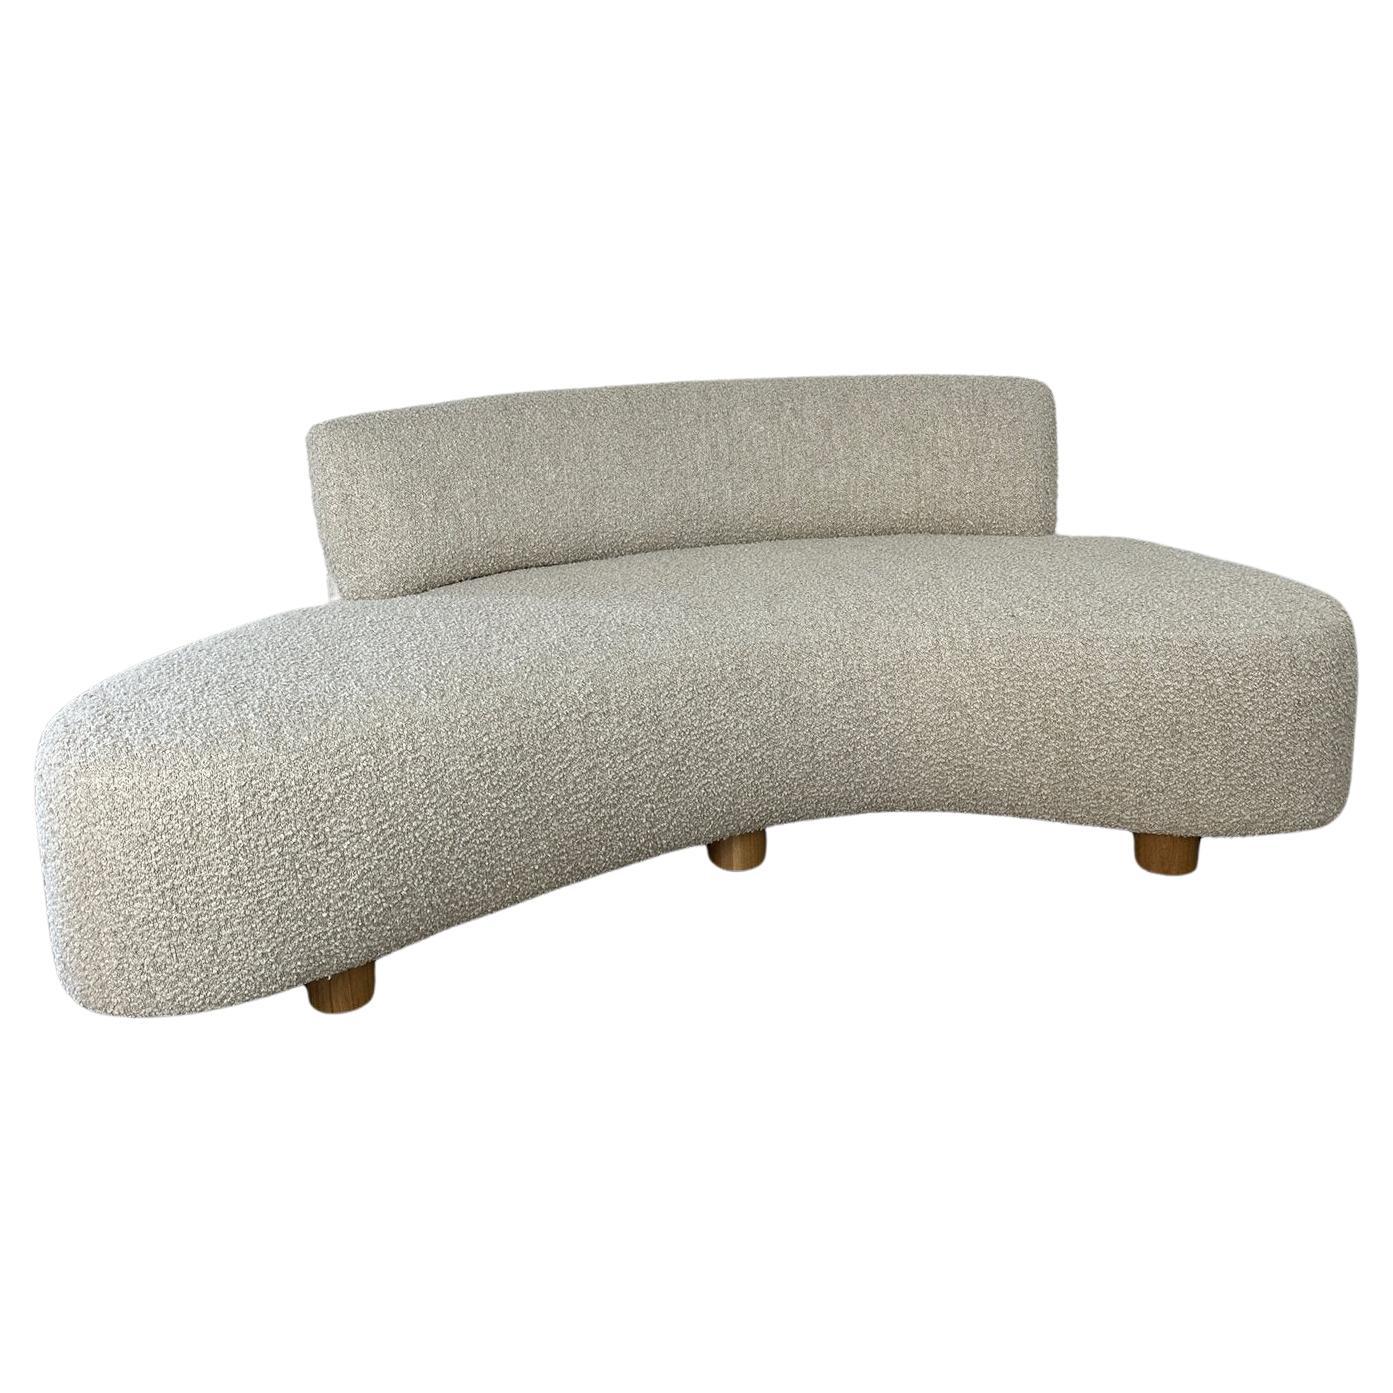 Crest sofa in Boucle